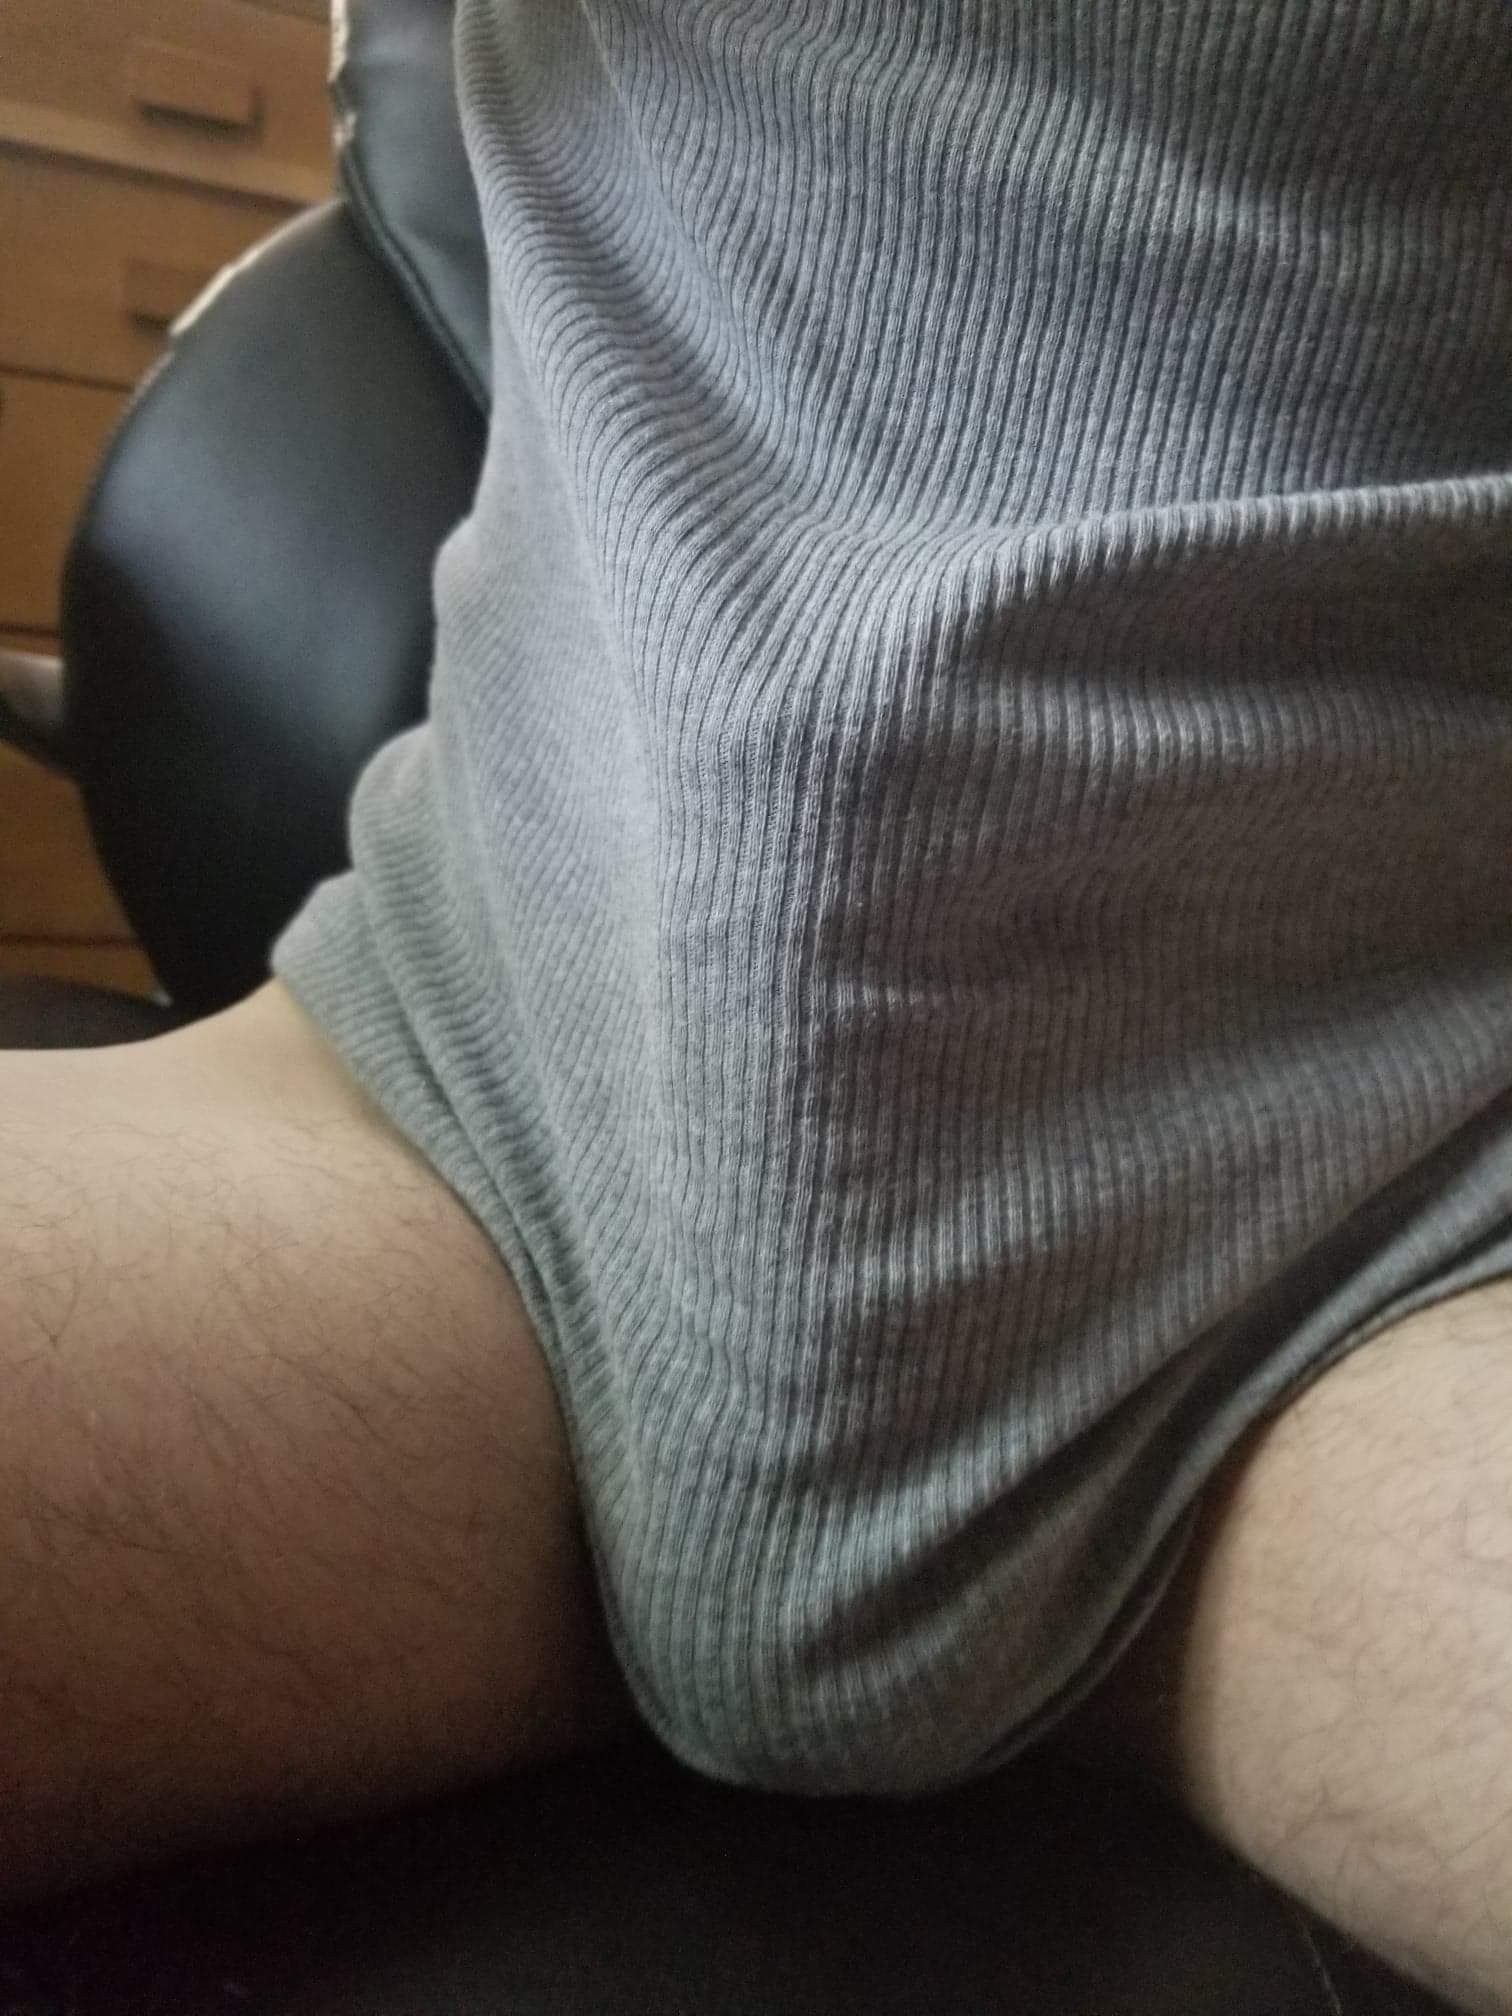 Photo by Ladyrage with the username @Ladyrage,  November 24, 2020 at 4:51 PM and the text says 'i absolutley love the bulge of your dick and imagination it gives me @personalfootprint'